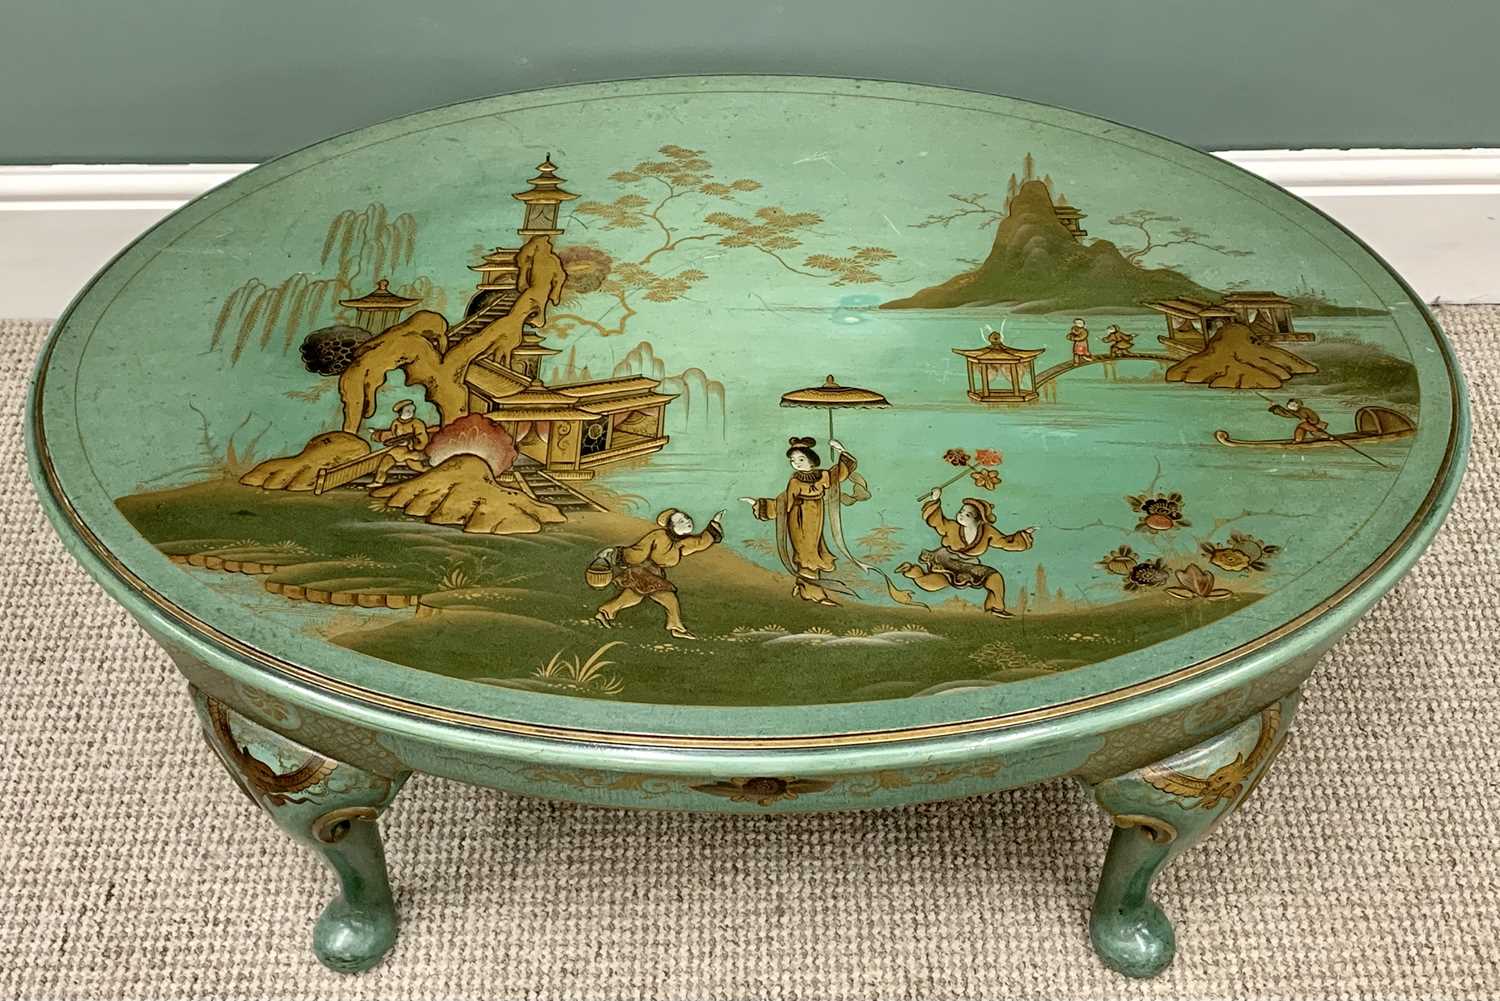 COFFEE TABLE - quality green chinoiserie decorated, oval topped with highly decorative lacquerwork